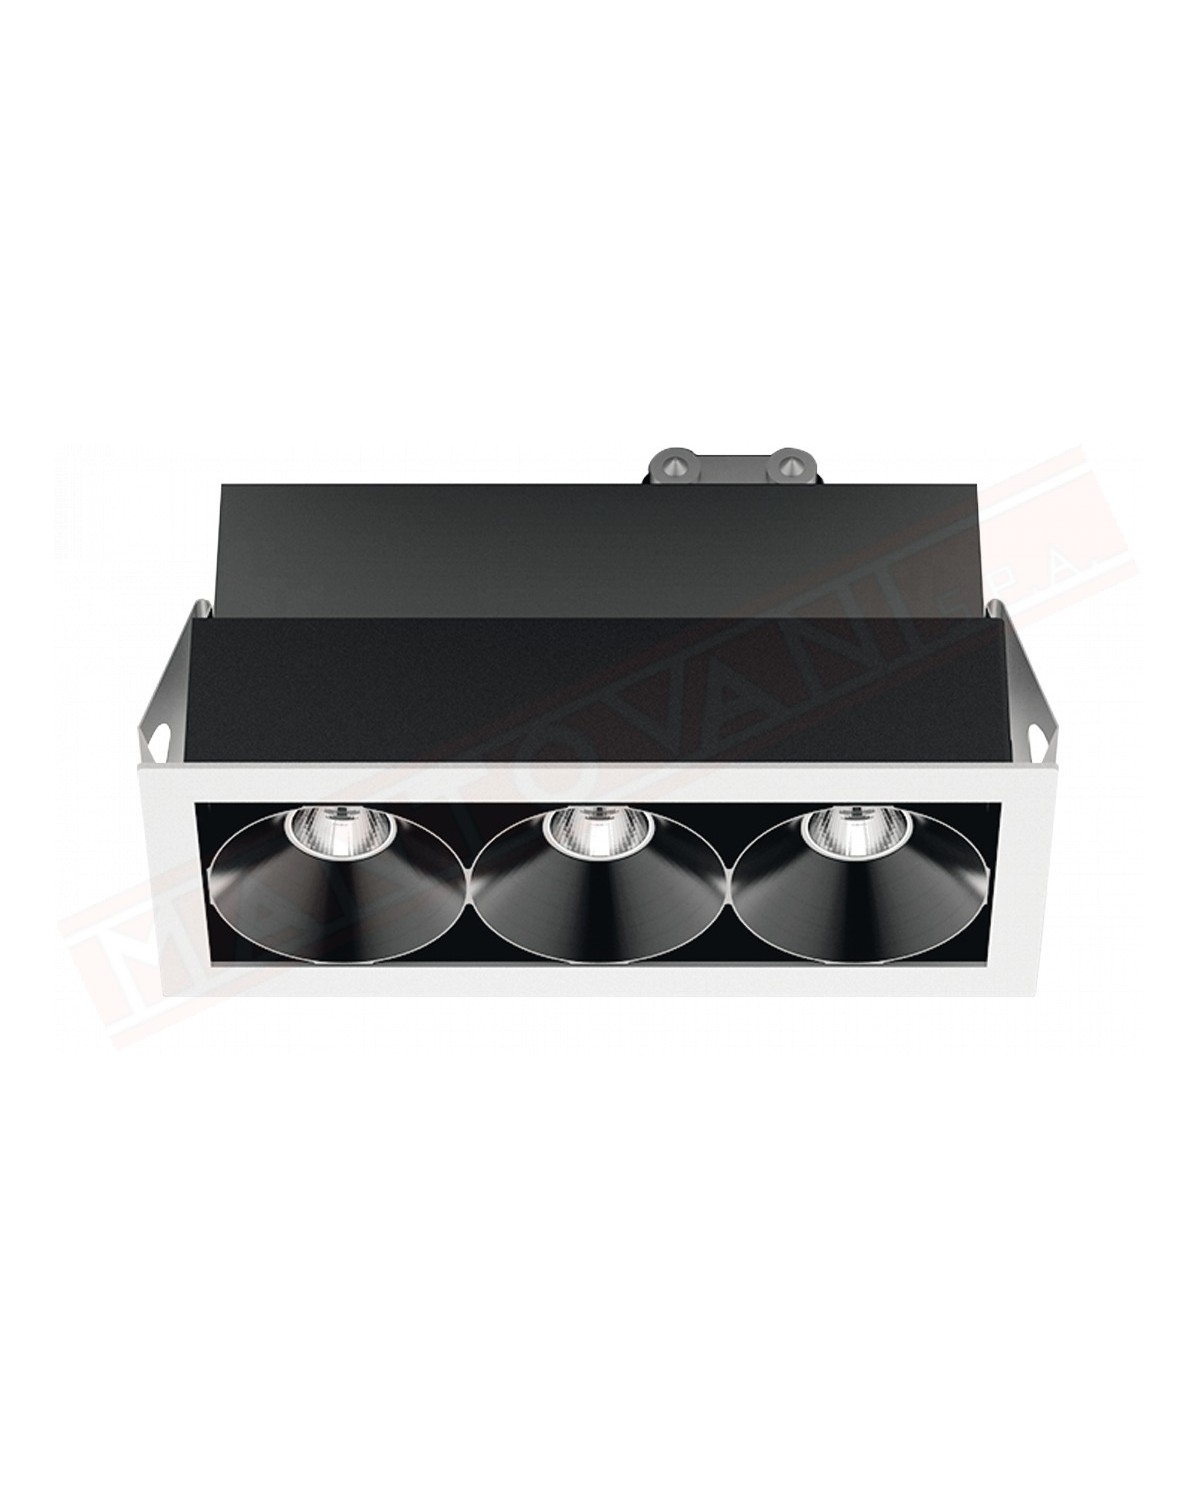 LineaLight Iled Cell incasso con flangia a led 6w 537 lm 3000k misure 119x50